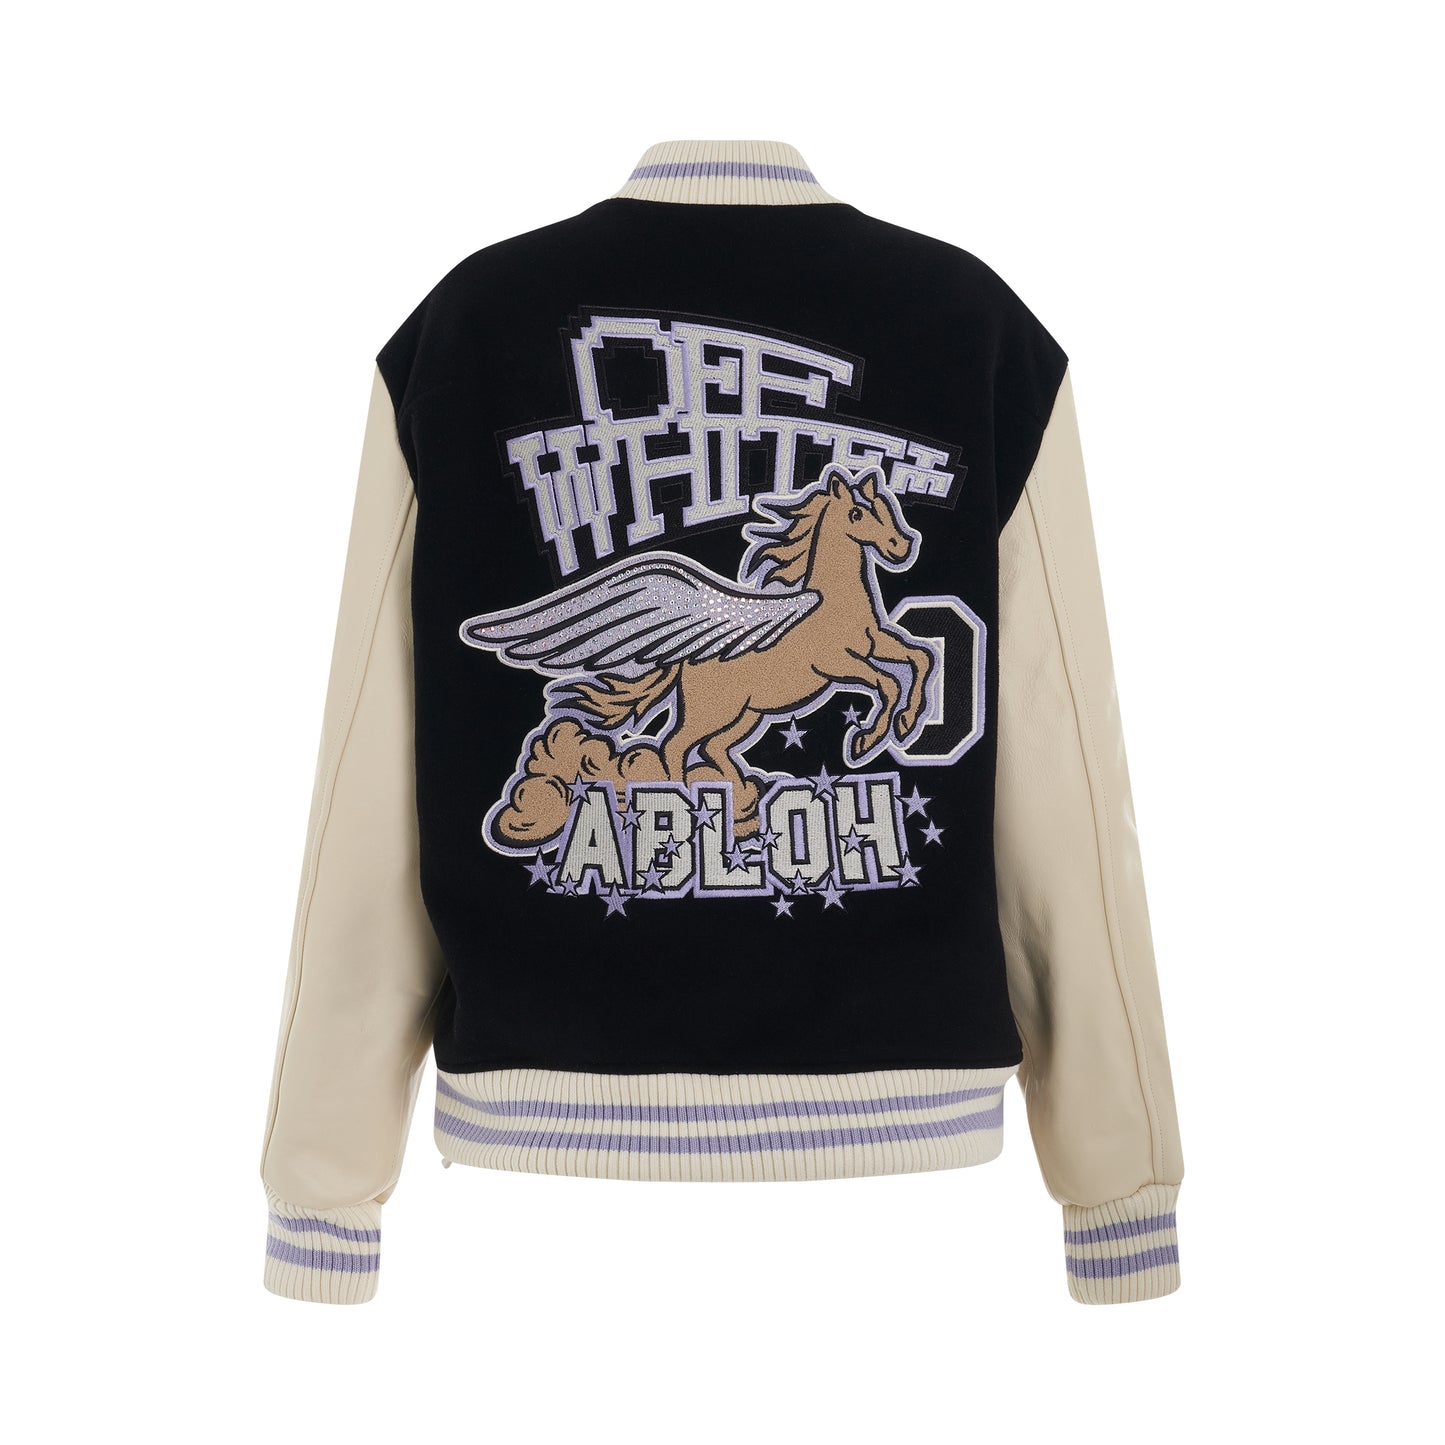 Embroidered Patch Logo Varsity Jacket in Black/Lilac